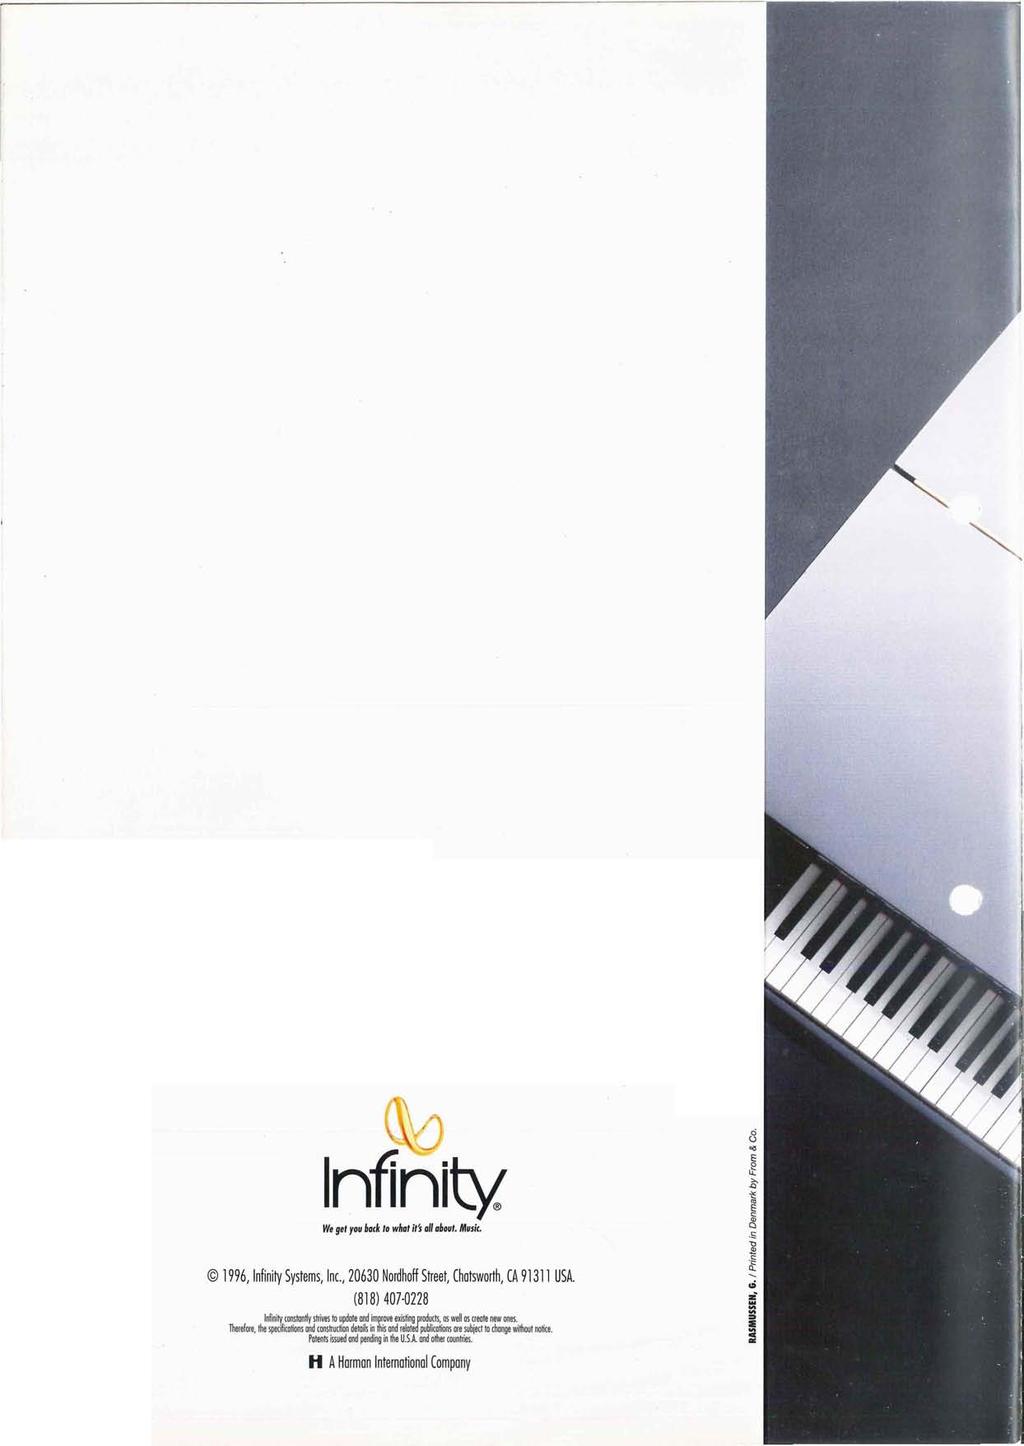 Infinity We get you back to what it's all about. Music. 1996, Infinity Systems, Inc., 20630 Nordhoff Street, Chatsworth, CA 91311 USA.